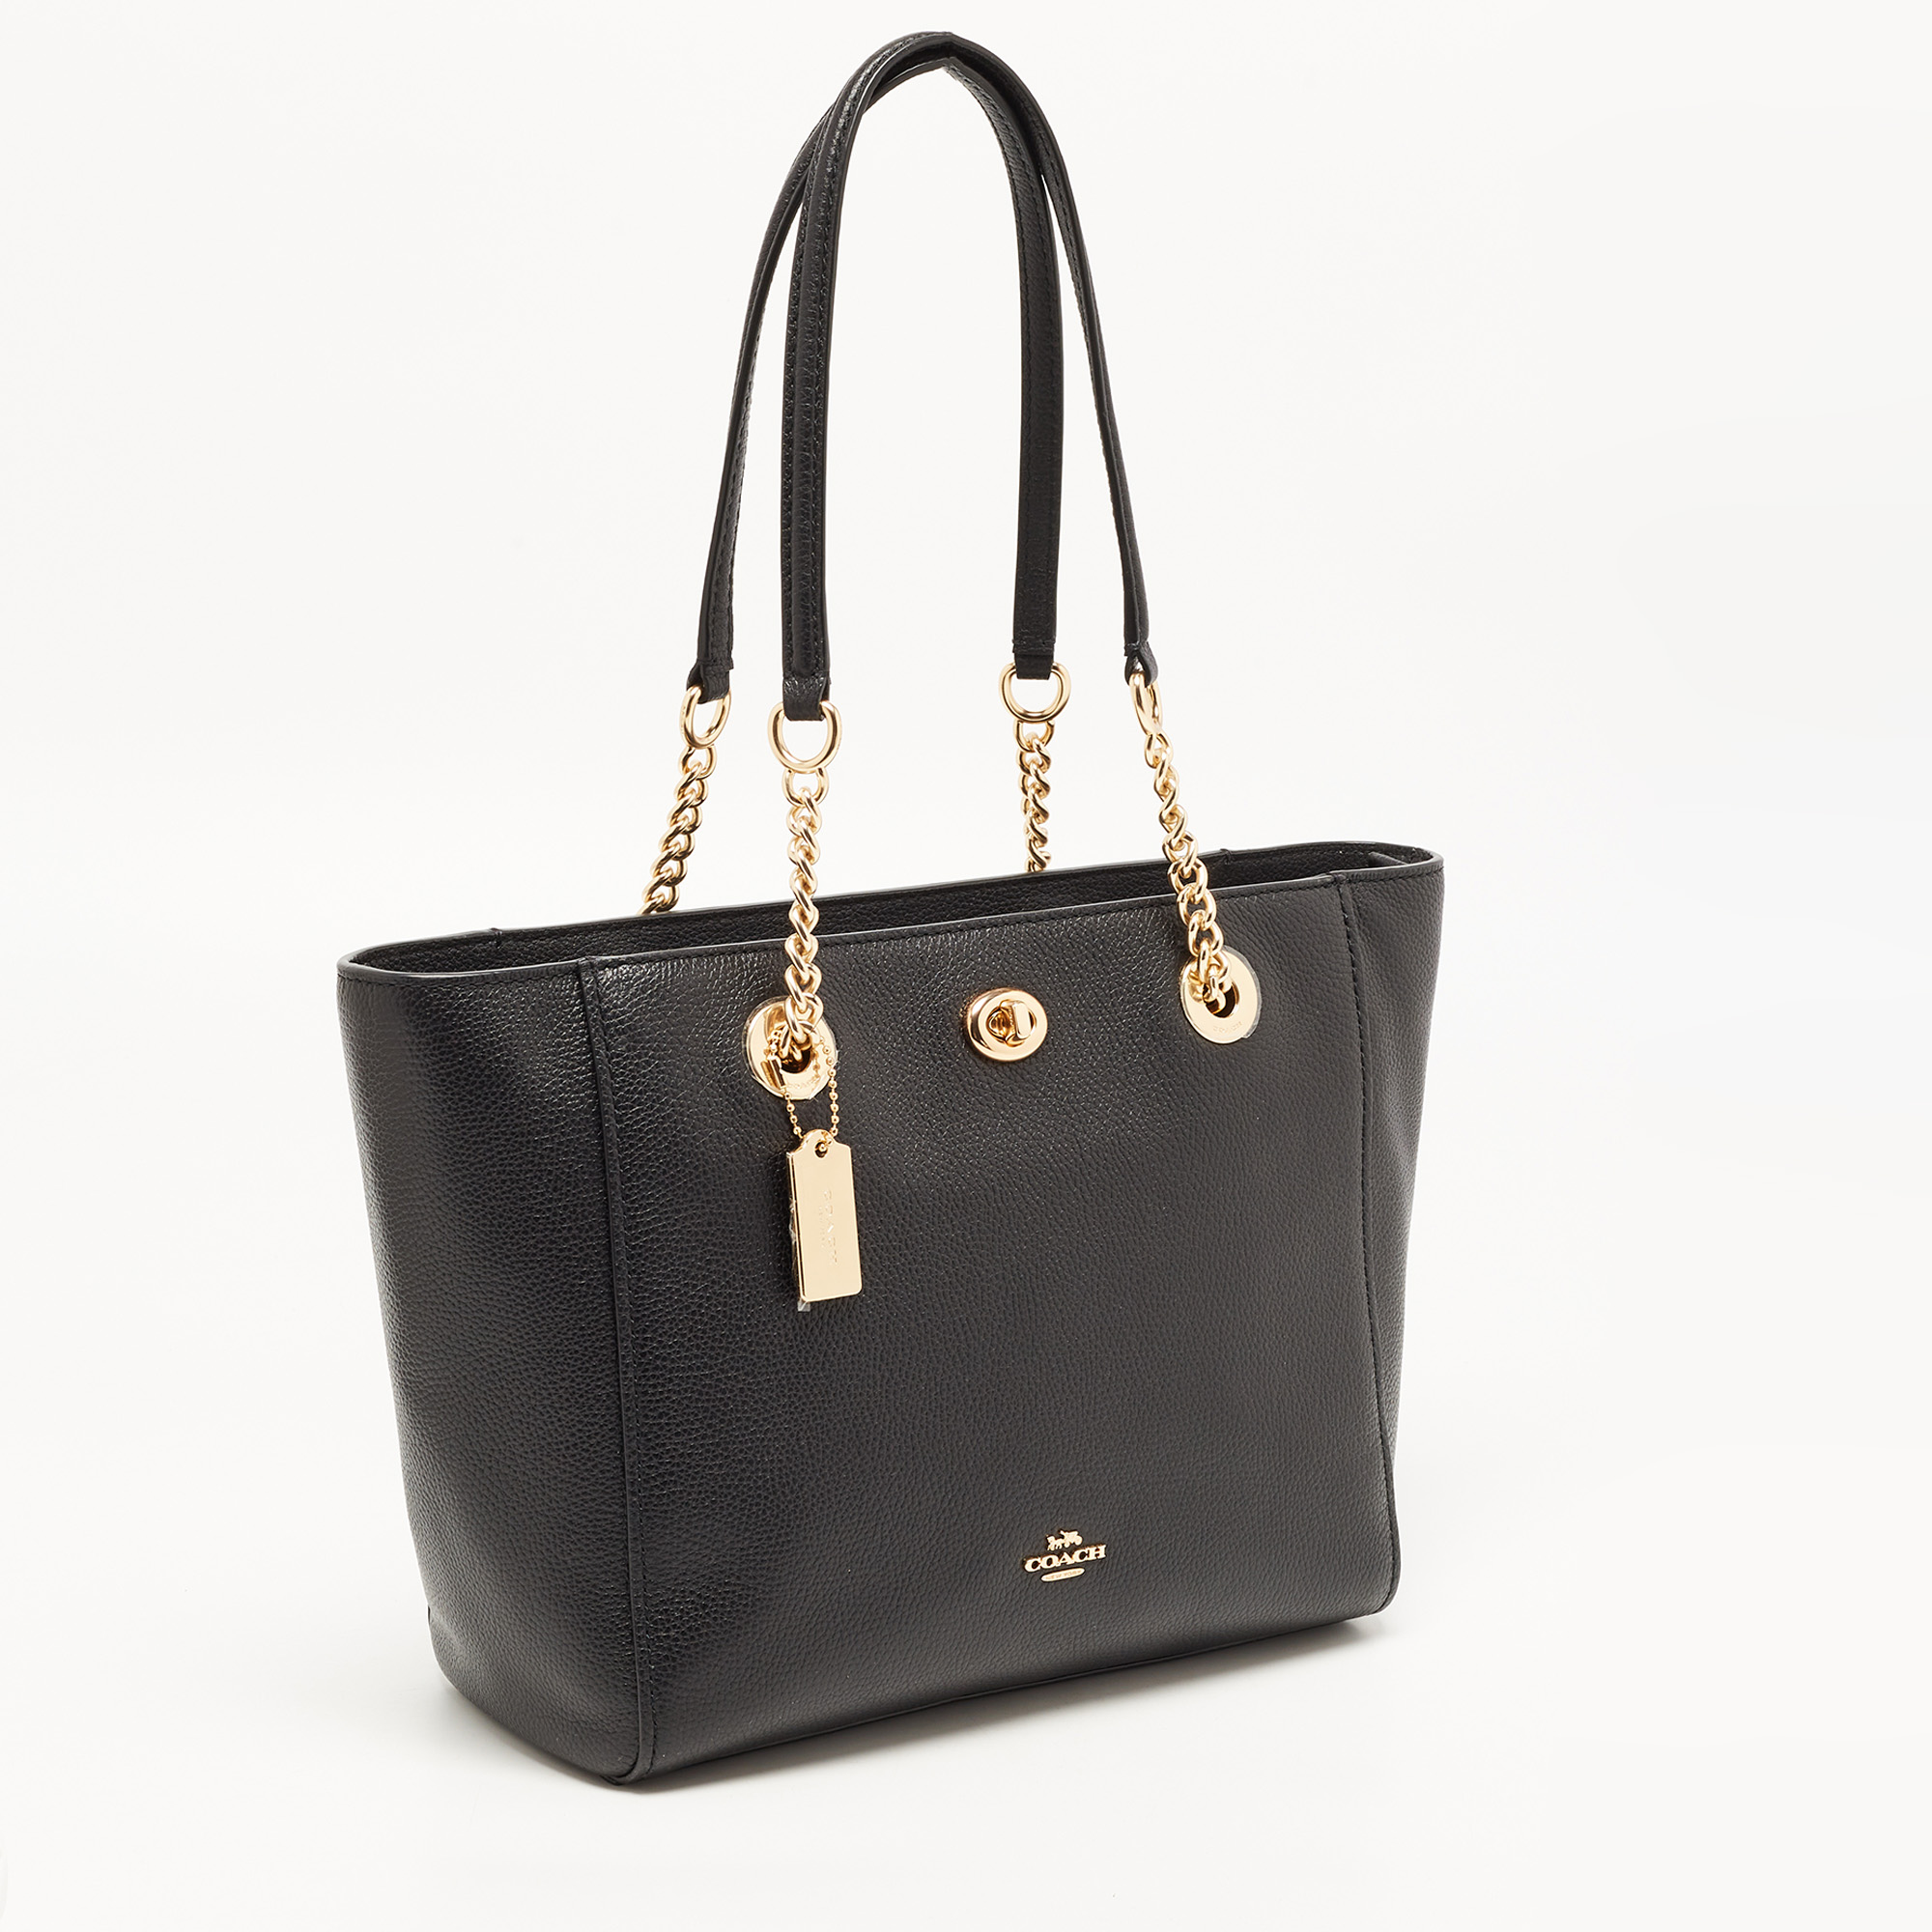 Coach Black Pebbled Leather Turnlock Chain Tote